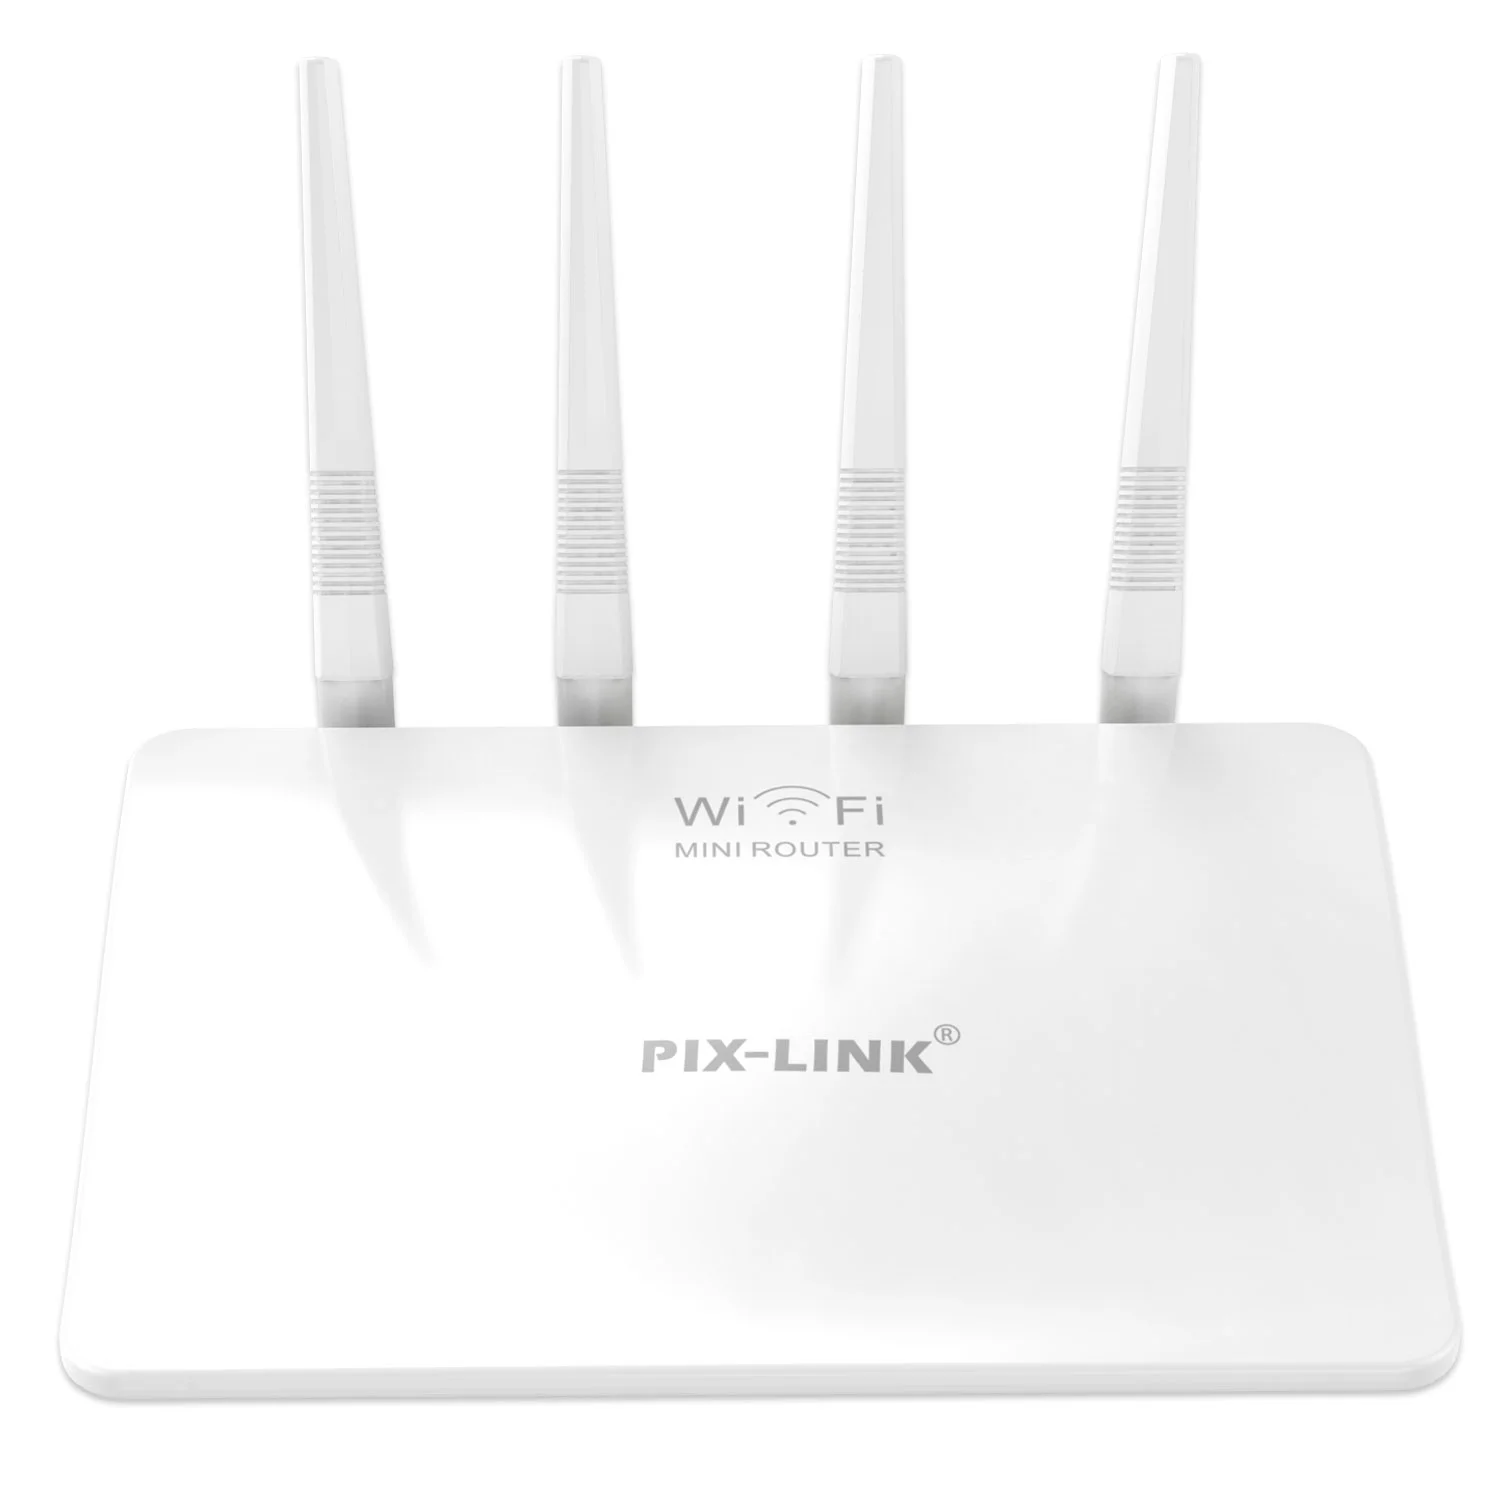 

PIX-LINK LV-WR21Q Internet Mini Wifi Routers Wireless 300Mbps 4 External Antennas for Home